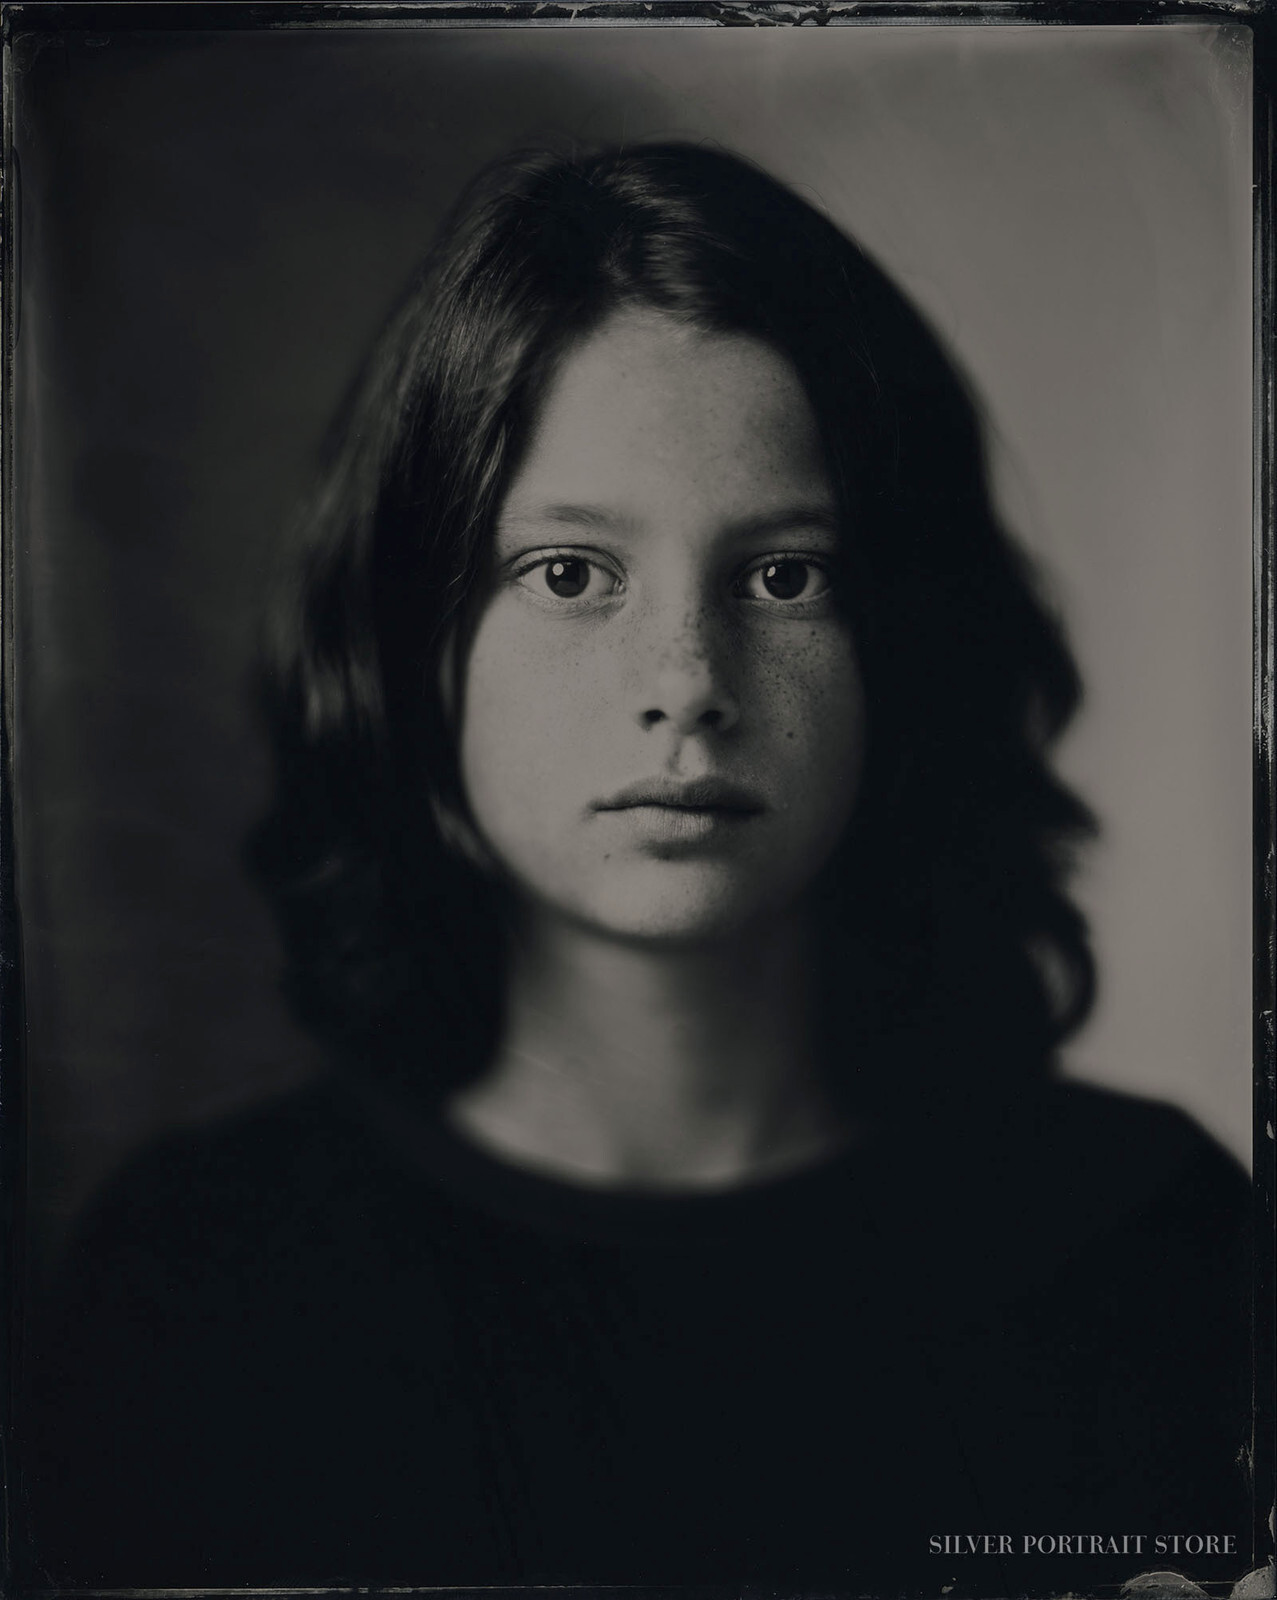 Djuna-Silver Portrait Store-scan from Wet plate collodion-Tintype 20 x 25 cm.